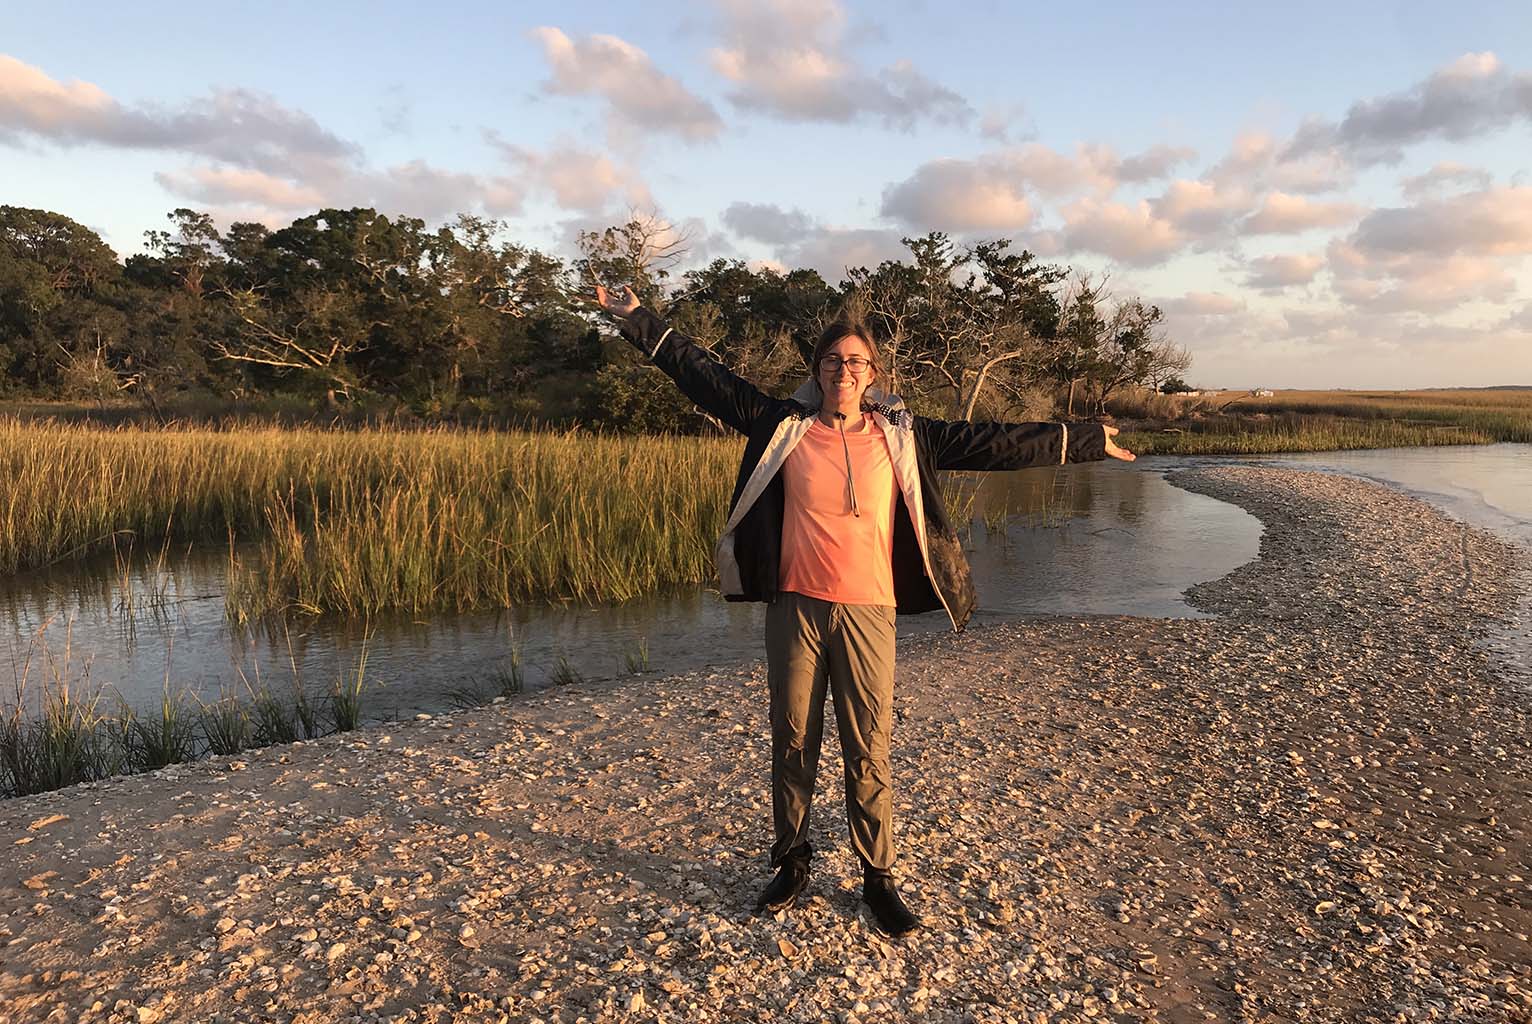 Nicole Spanier wears a light-weight jacket while standing on a dry strip of gravel-covered soil with arms outstretched. Flooded grassland surrounds her. Green-leafed trees are in the background. The sky is pale blue with clouds tinged in pinks and grays, suggesting a sunset.